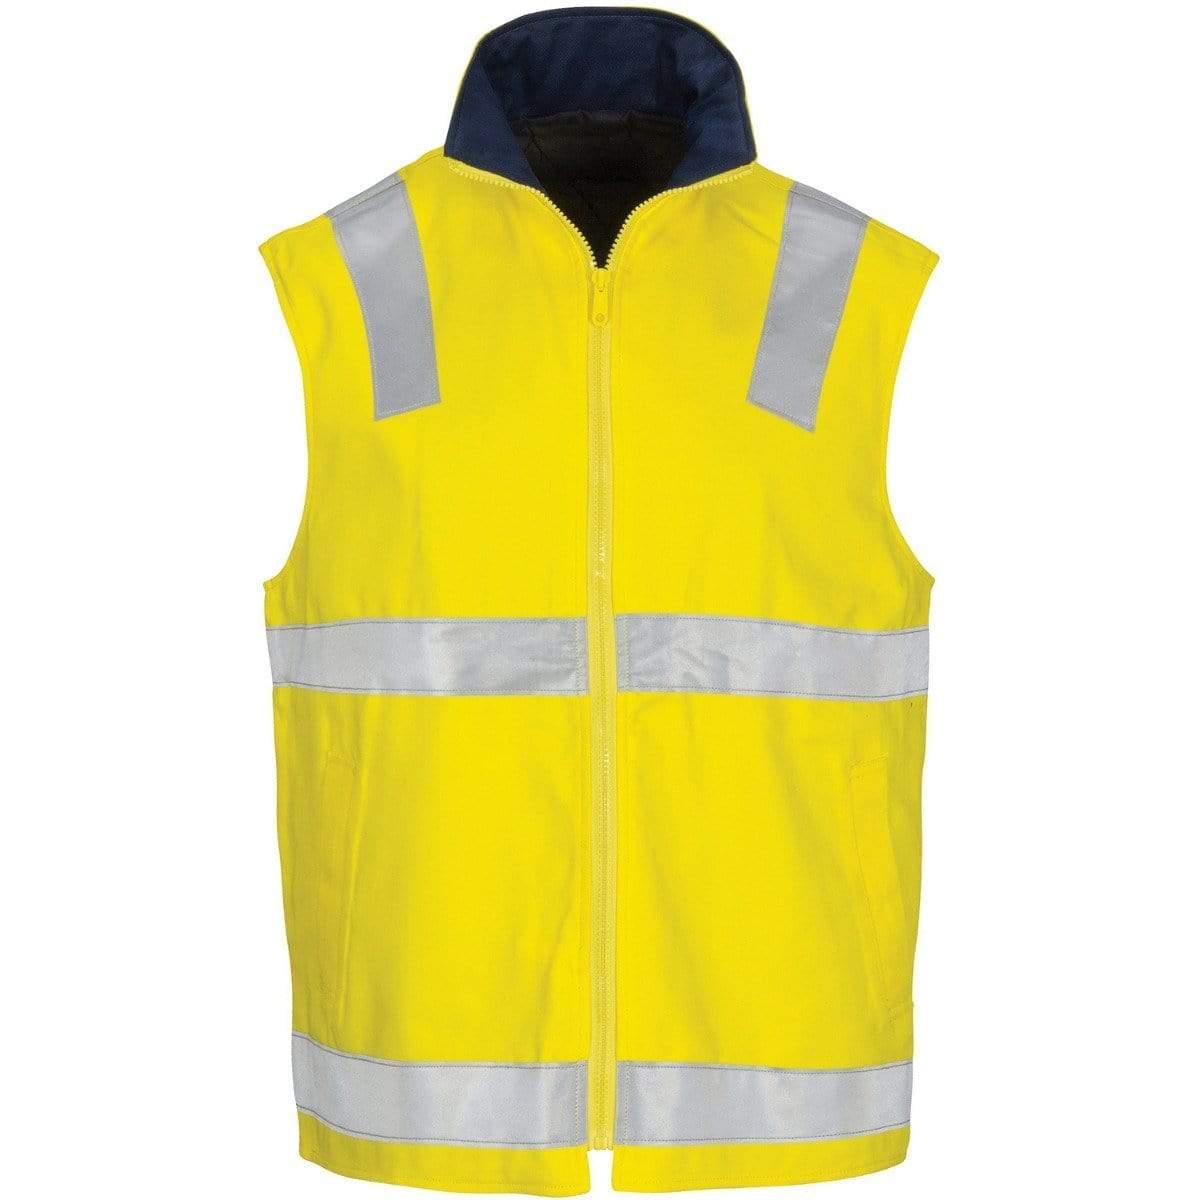 Dnc Workwear Hi-vis Cotton Drill Reversible Vest With Generic Reflective Tape - 3765 Work Wear DNC Workwear Yellow/Navy XS 